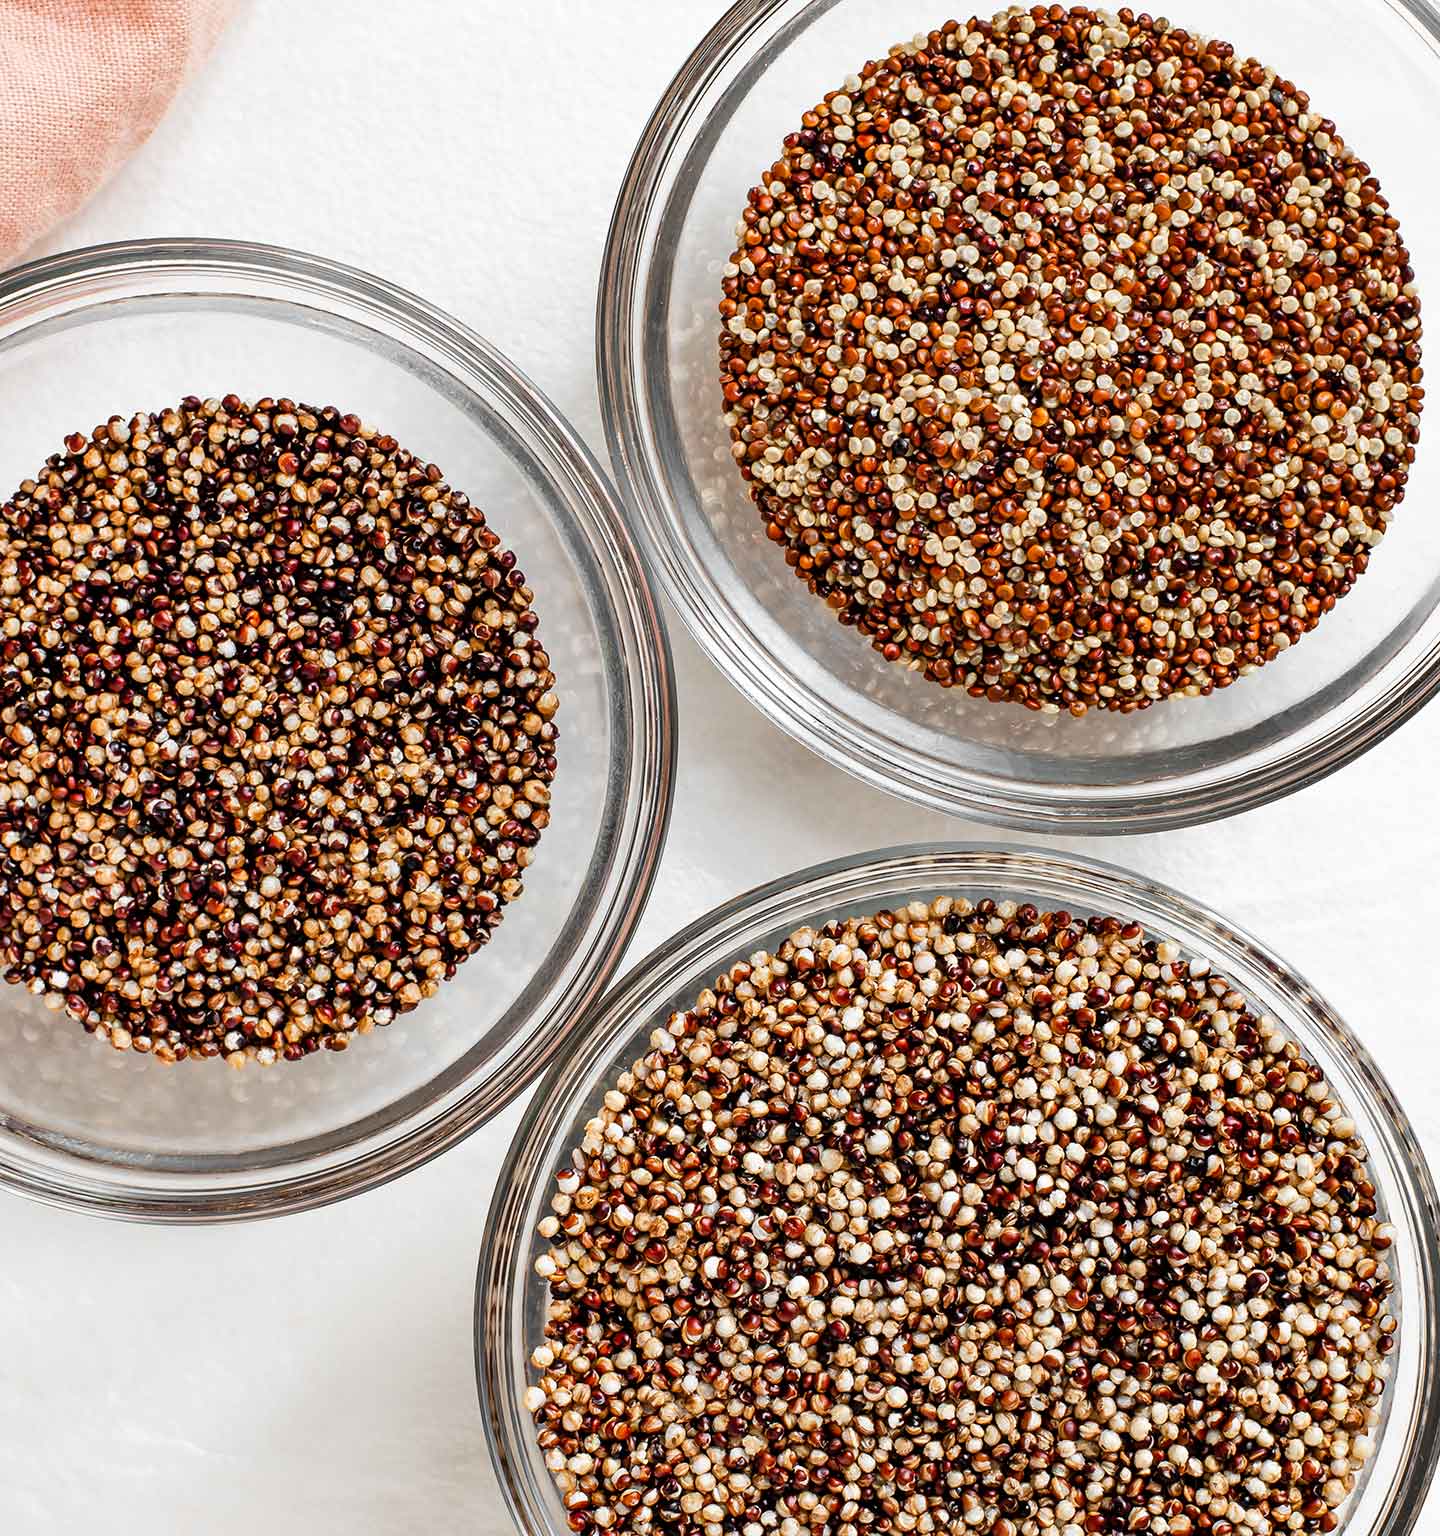 Top down view of three small bowls. In one is lightly coloured raw quinoa, in another is very dark quinoa, and in a third is lightly toasted and puffed up quinoa.